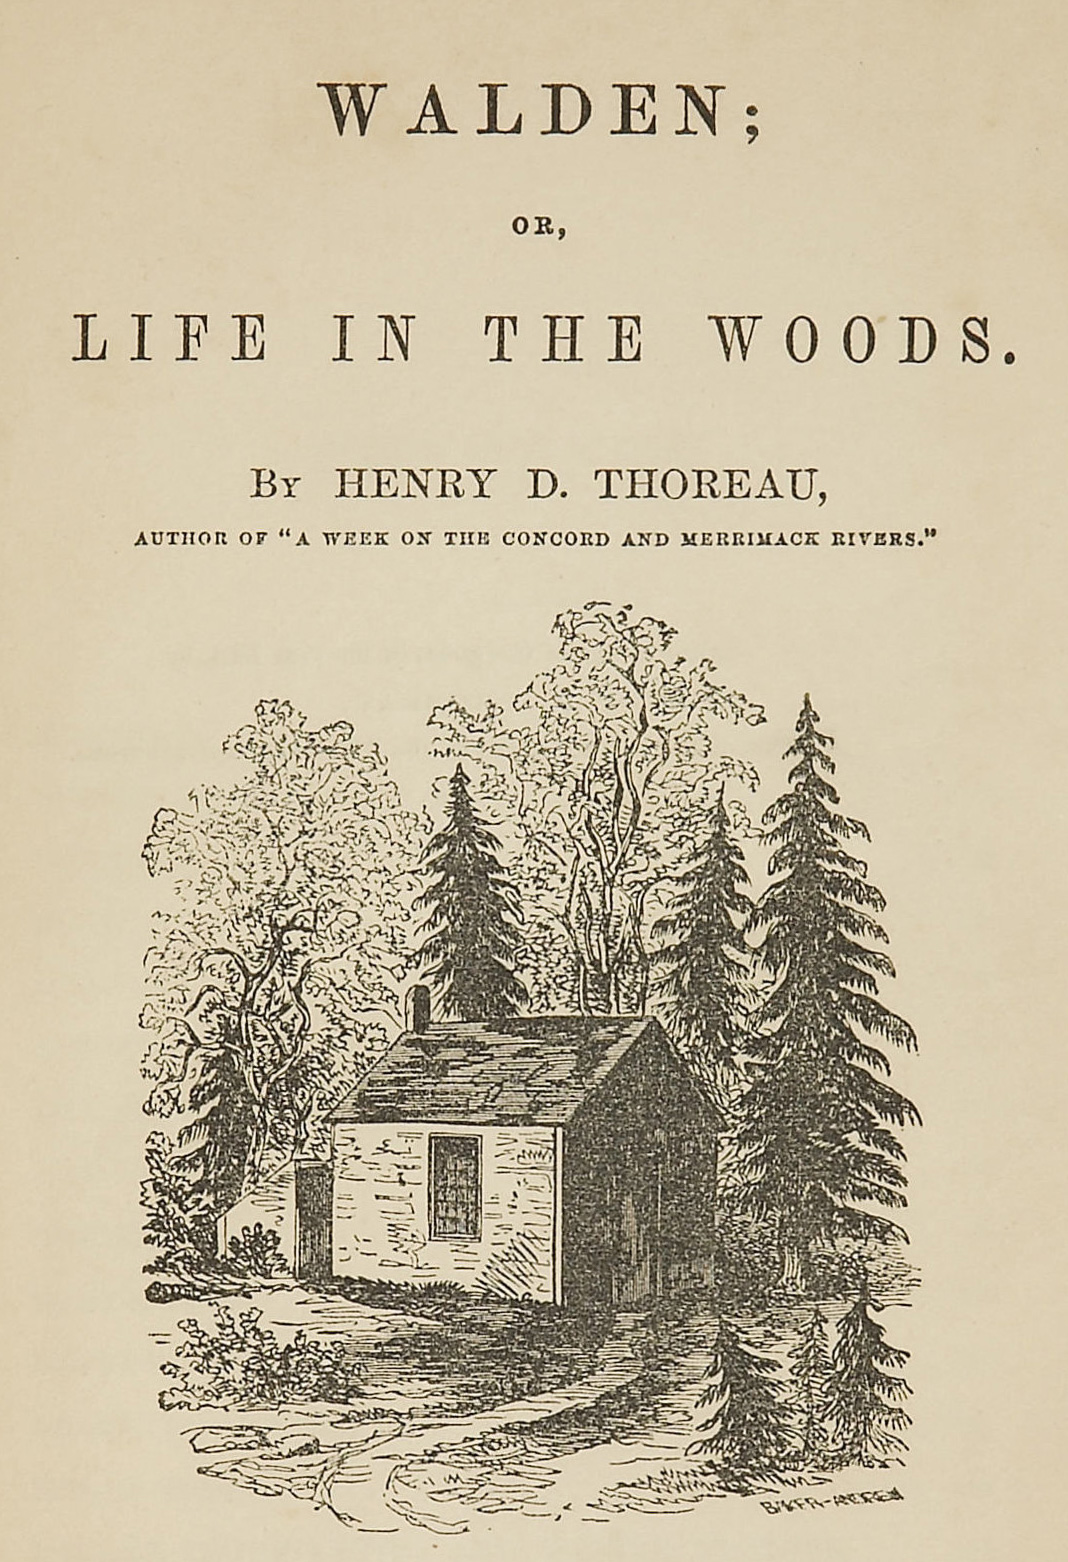 The Project Gutenberg eBook of Walden, by Henry David Thoreau pic